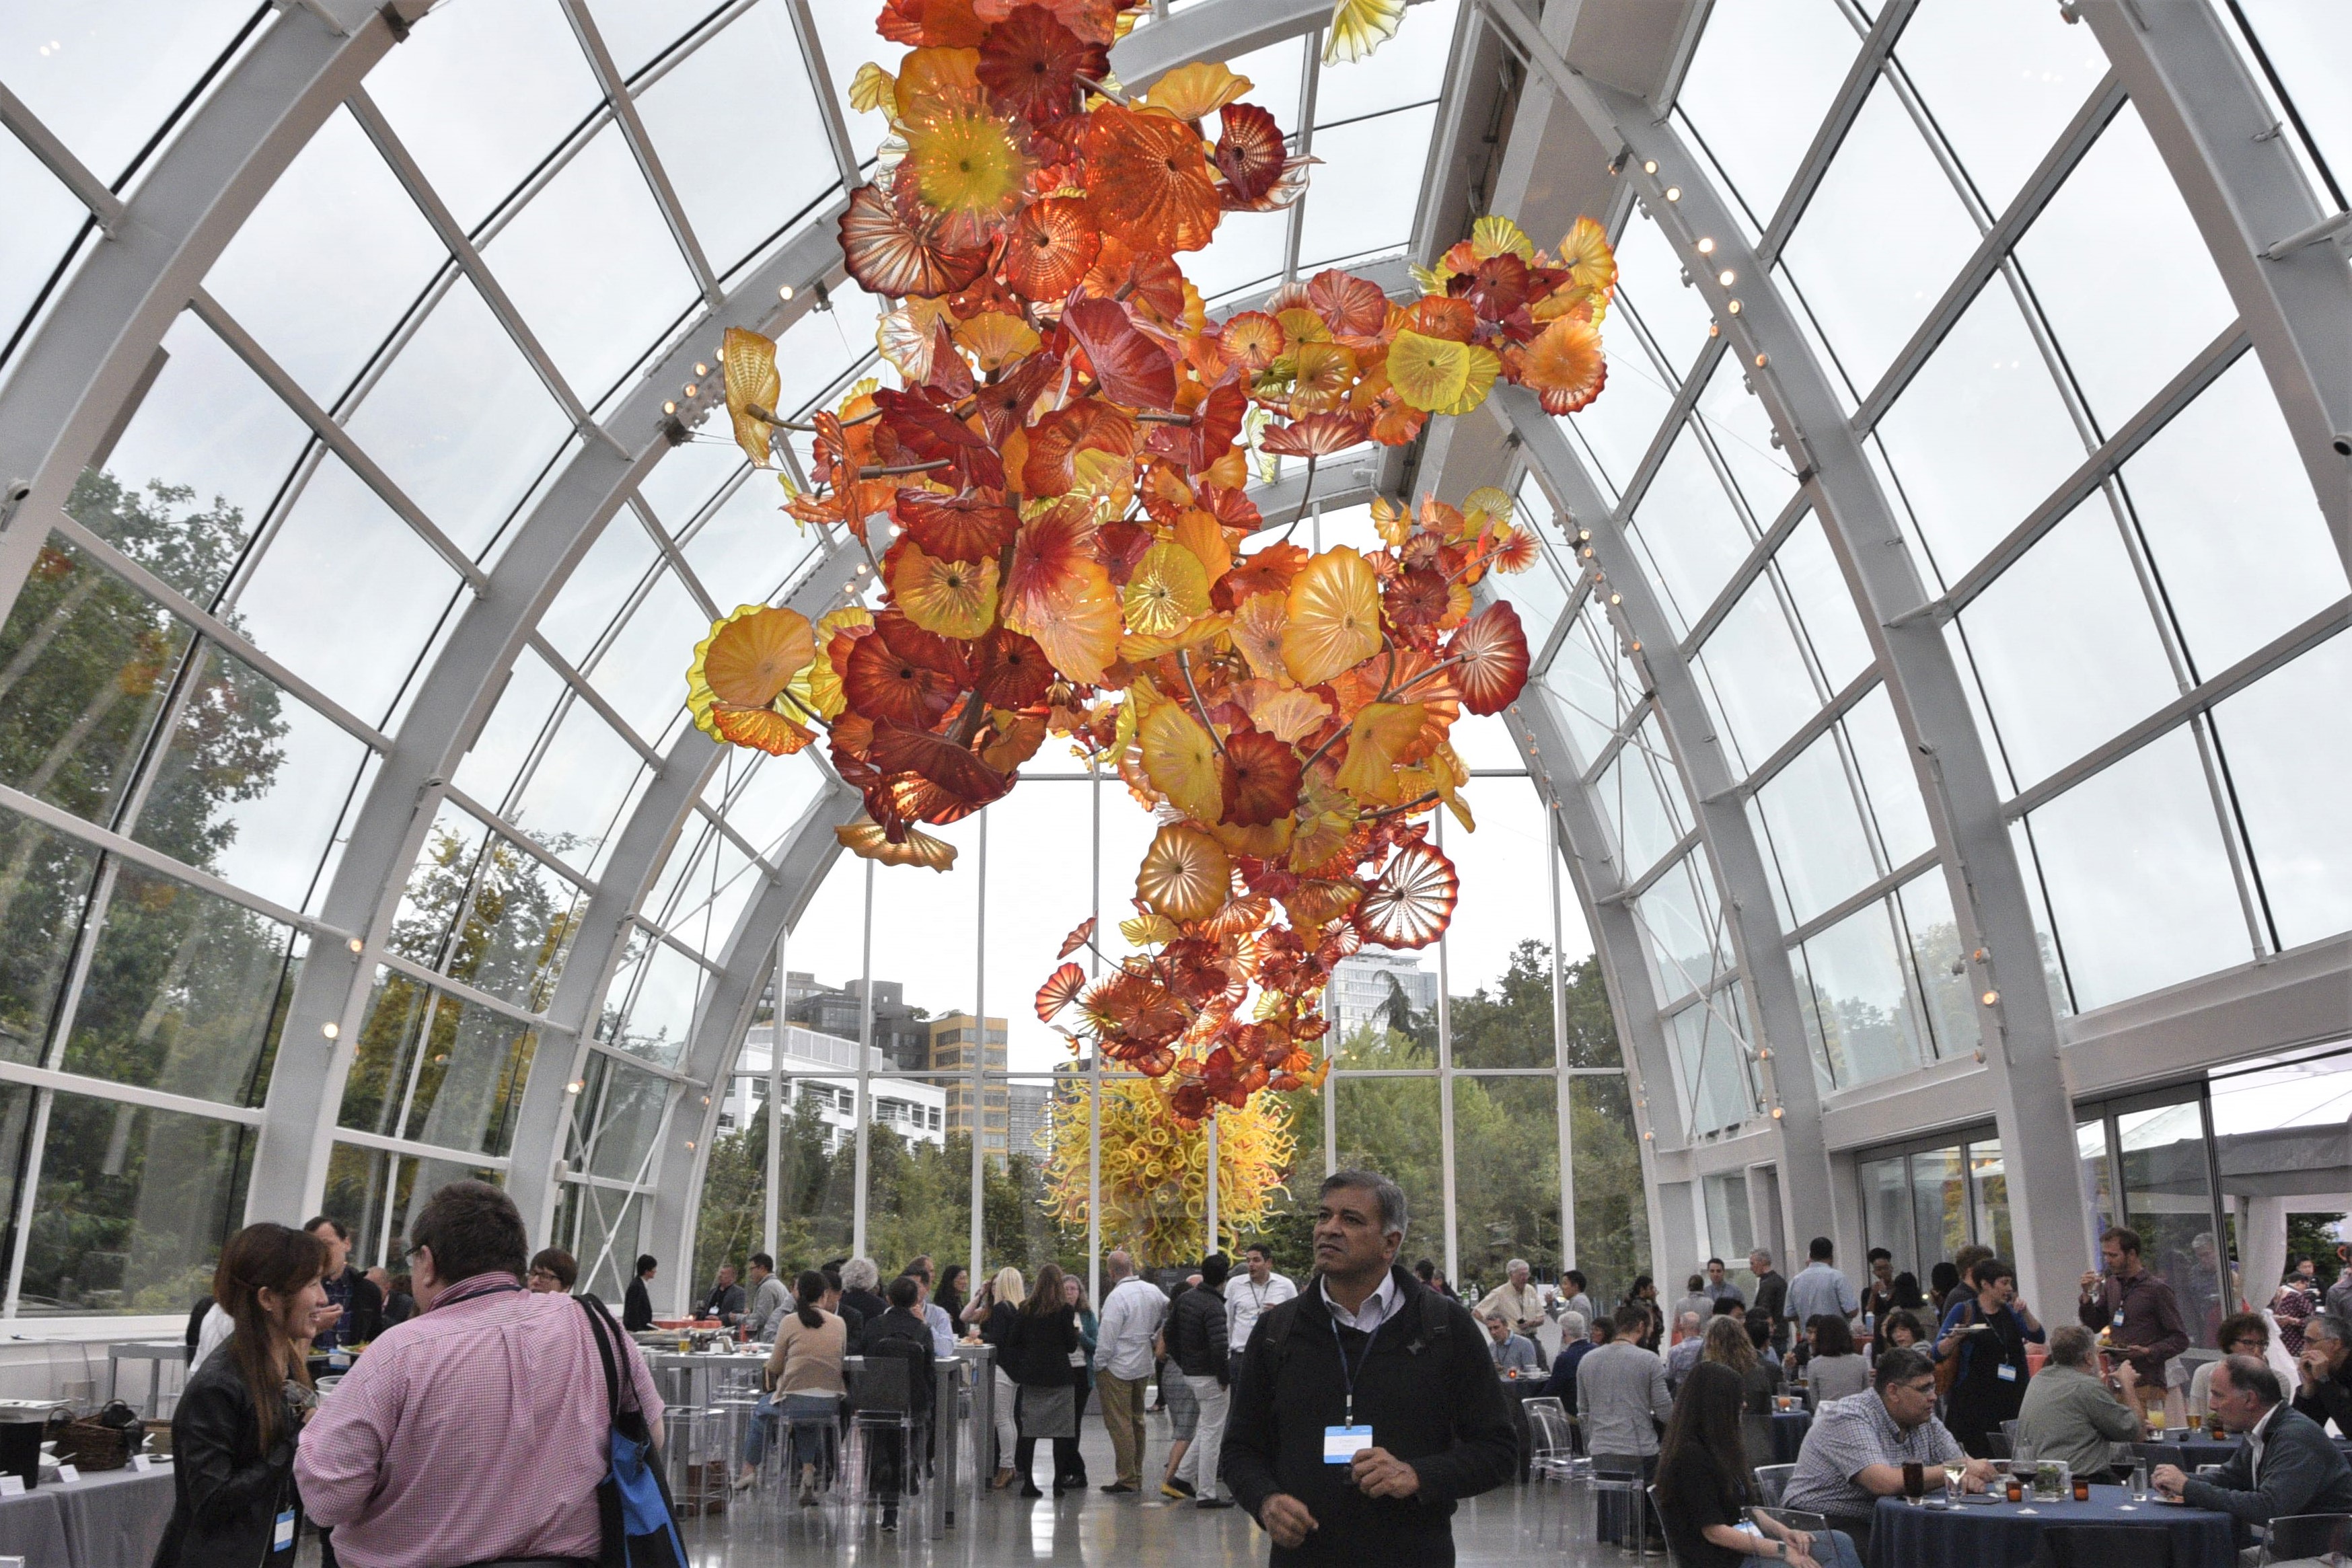 Faculty Summit 2019 @ Chihuly